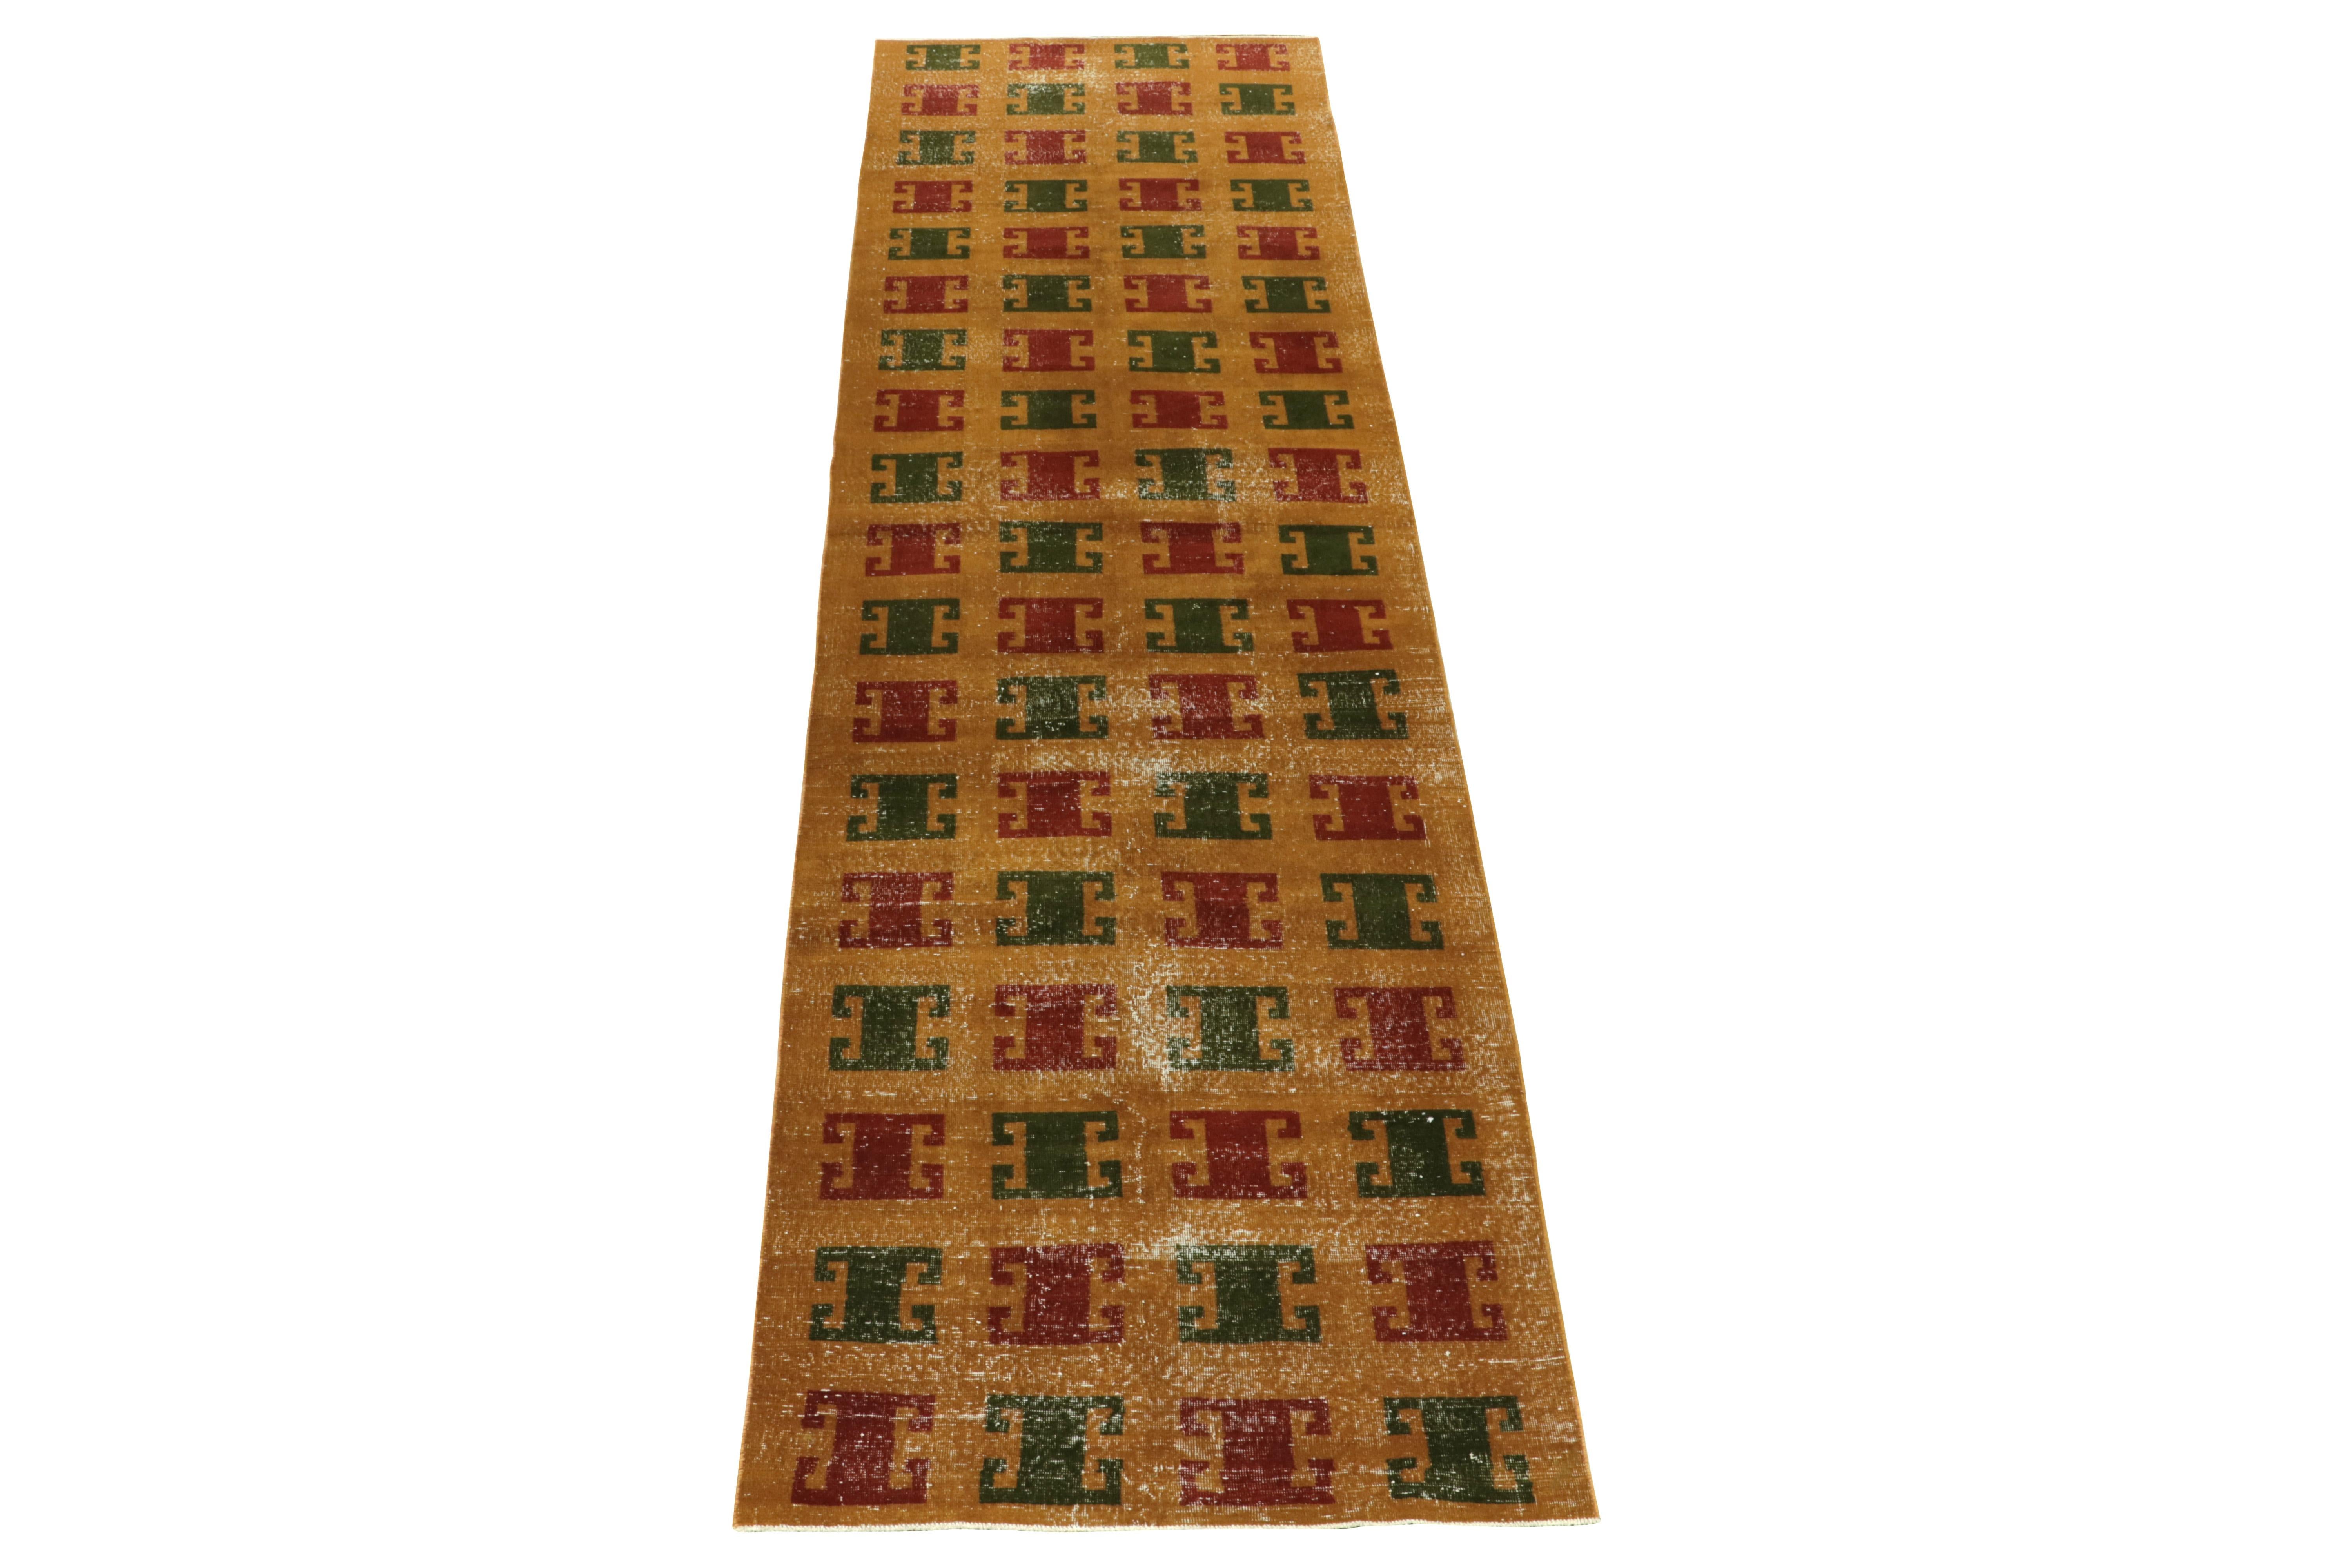 Hand-knotted in wool from Turkey circa 1960-1970, a vintage mid-century modern rug joining Rug & Kilim’s mid-century Pasha Collection. 

Commemorating rare works of a multidisciplinary Turkish artist of the period, this 4x14 carpet exemplifies the